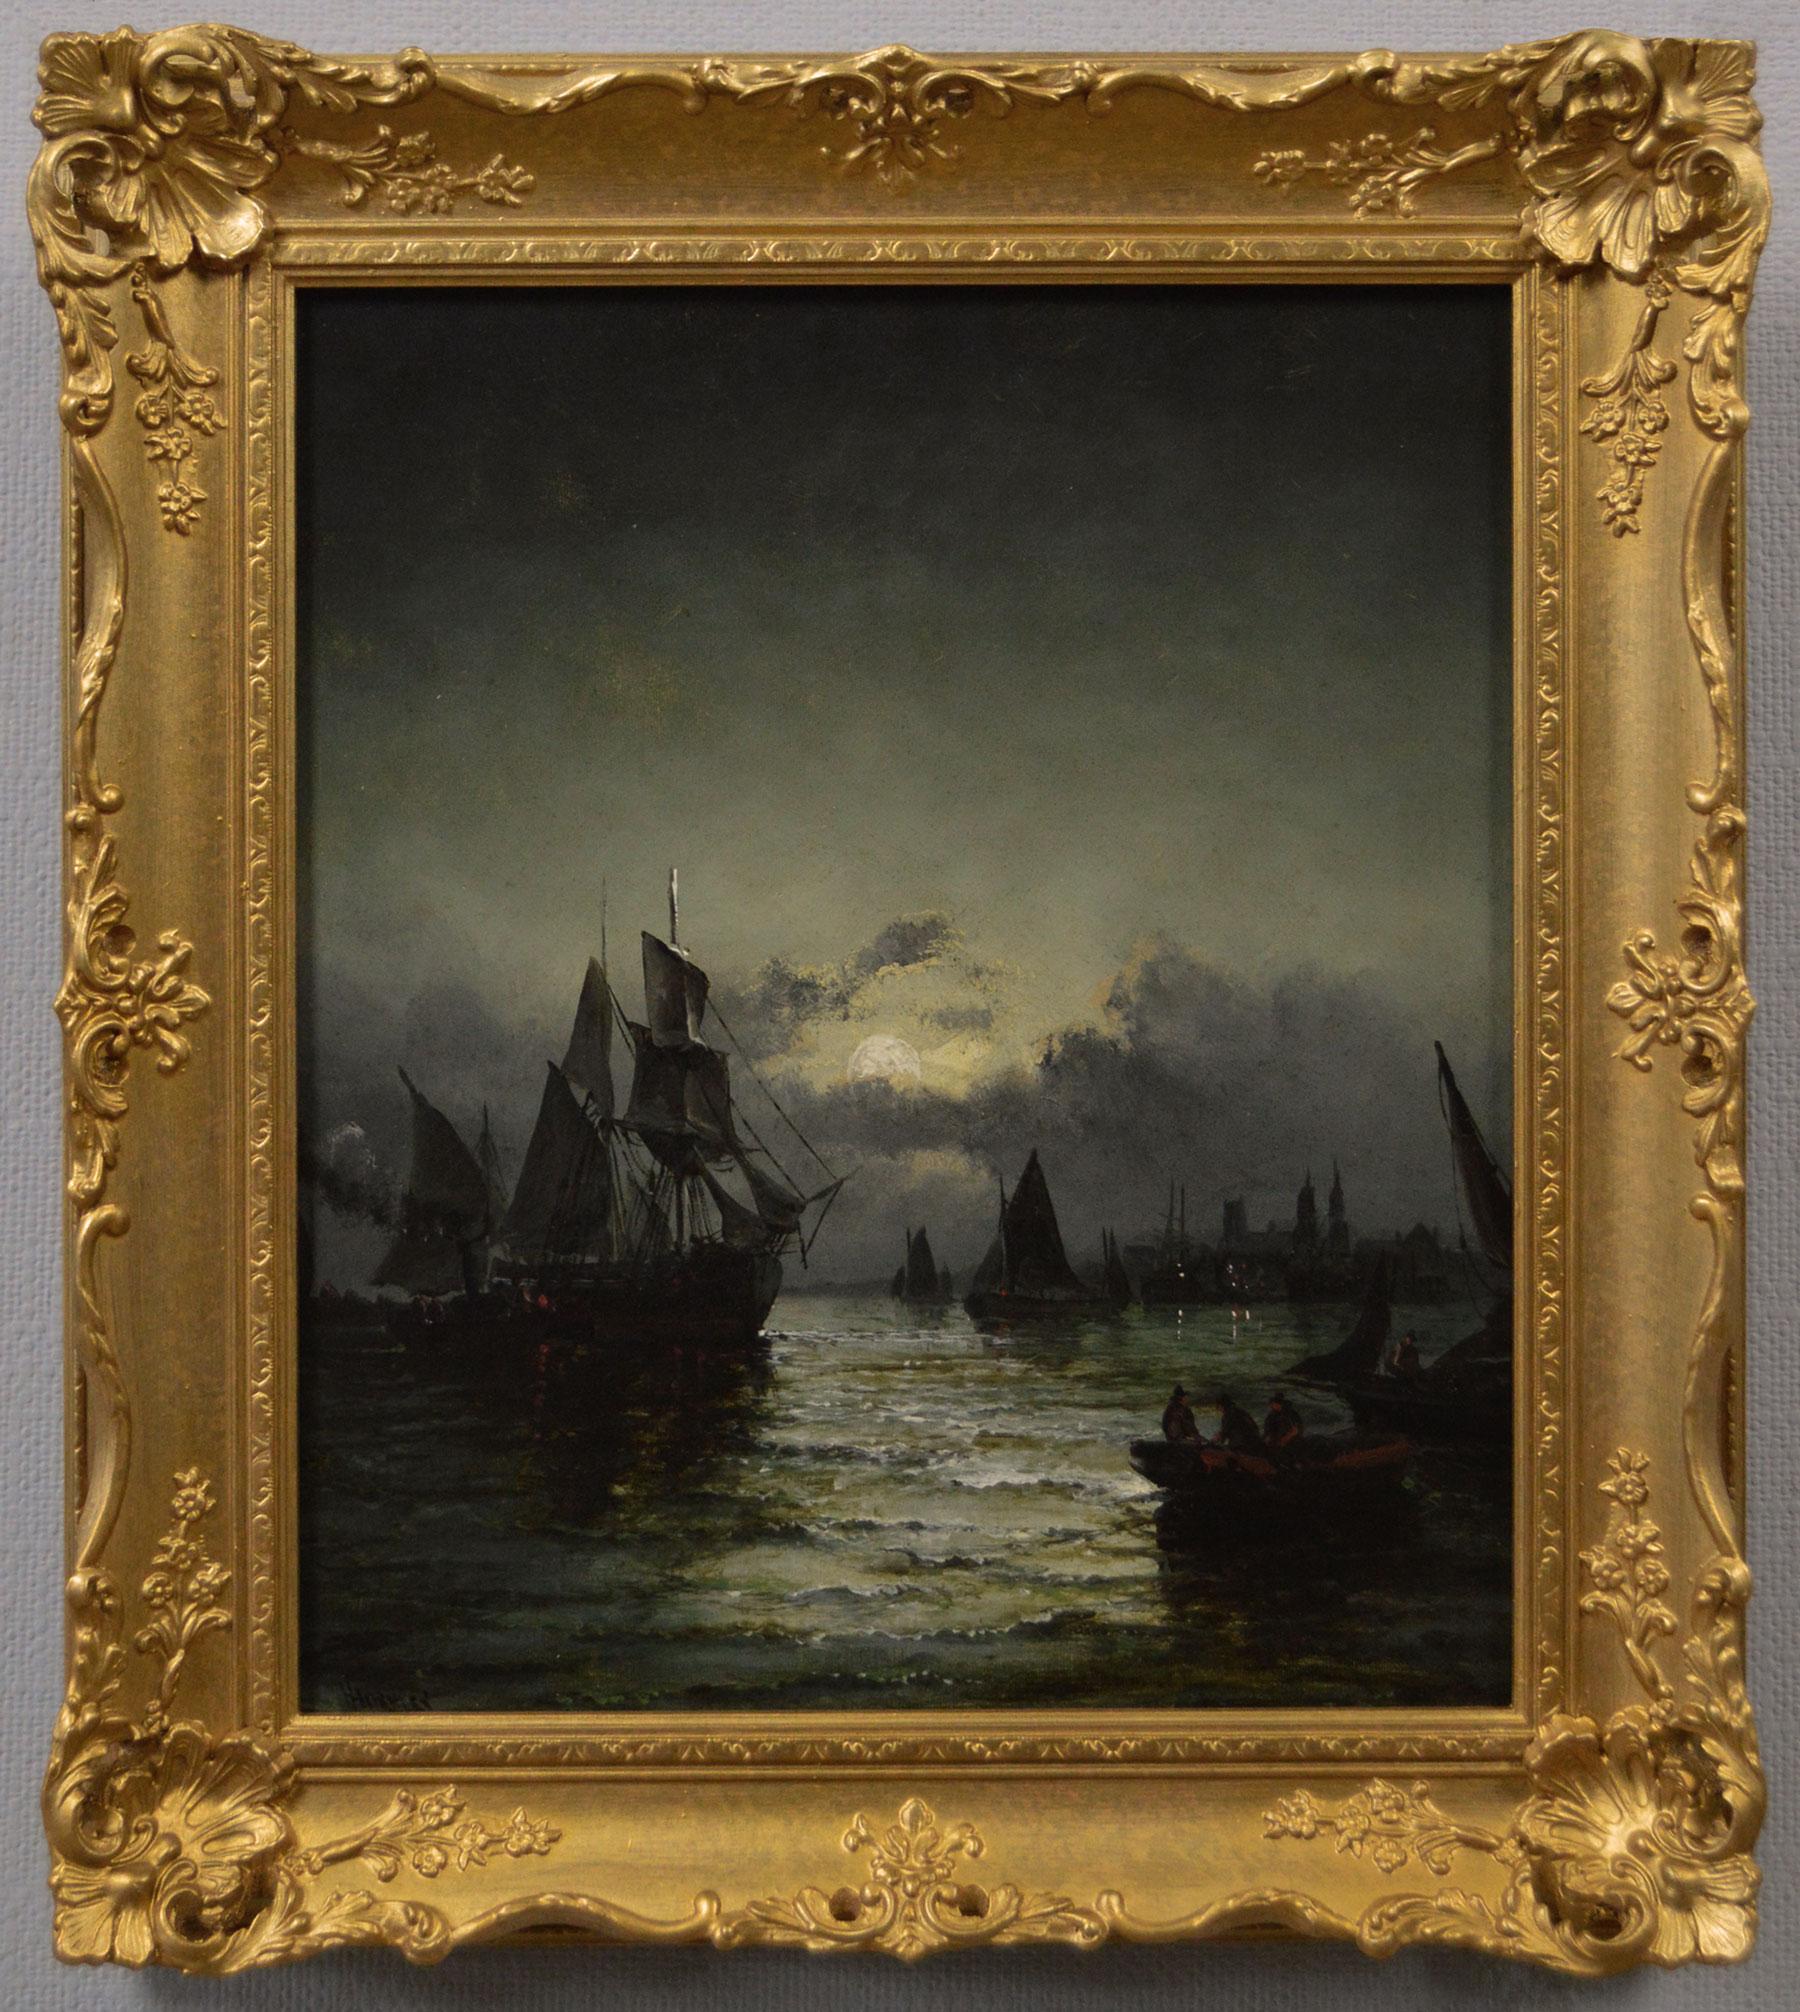 Hubert Thornley Landscape Painting - 19th Century seascape oil painting of shipping by moonlight on Dutch river